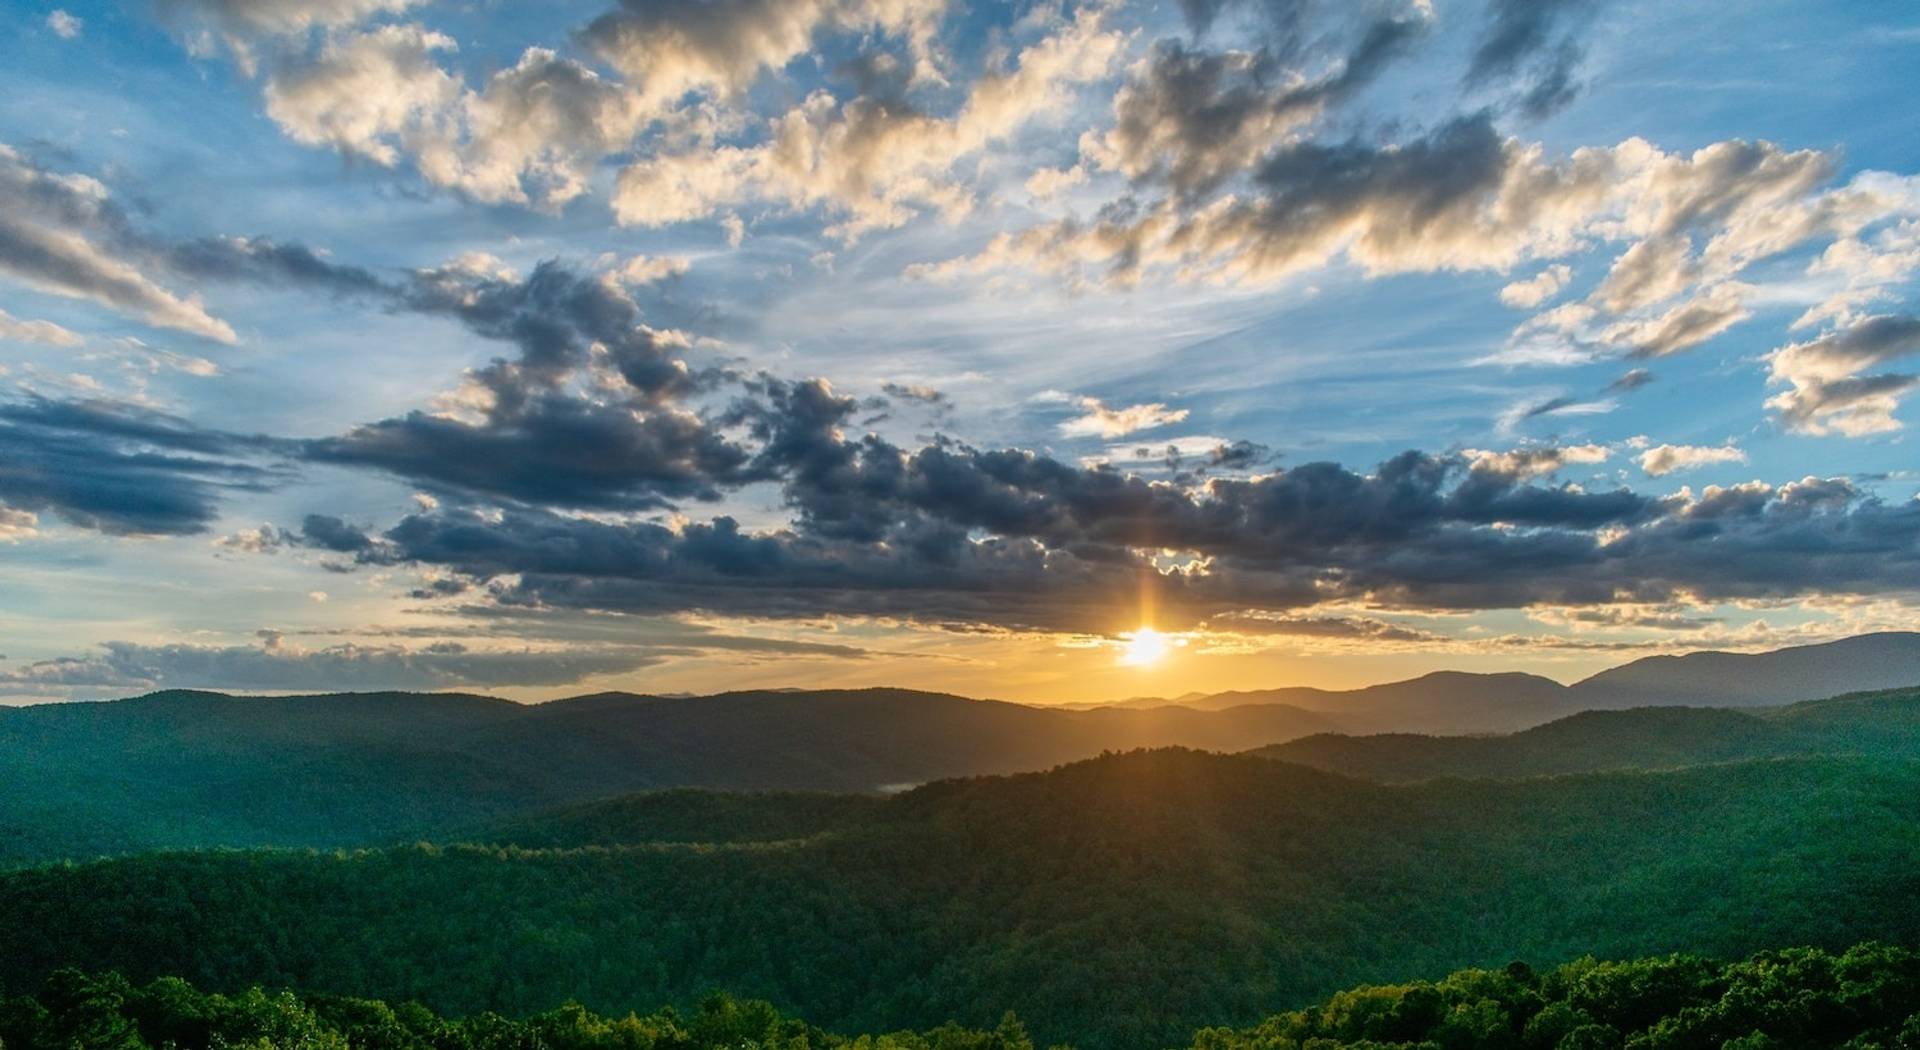 Sunset over the Appalachian Mountains to represent where to buy e-bikes in North Carolina